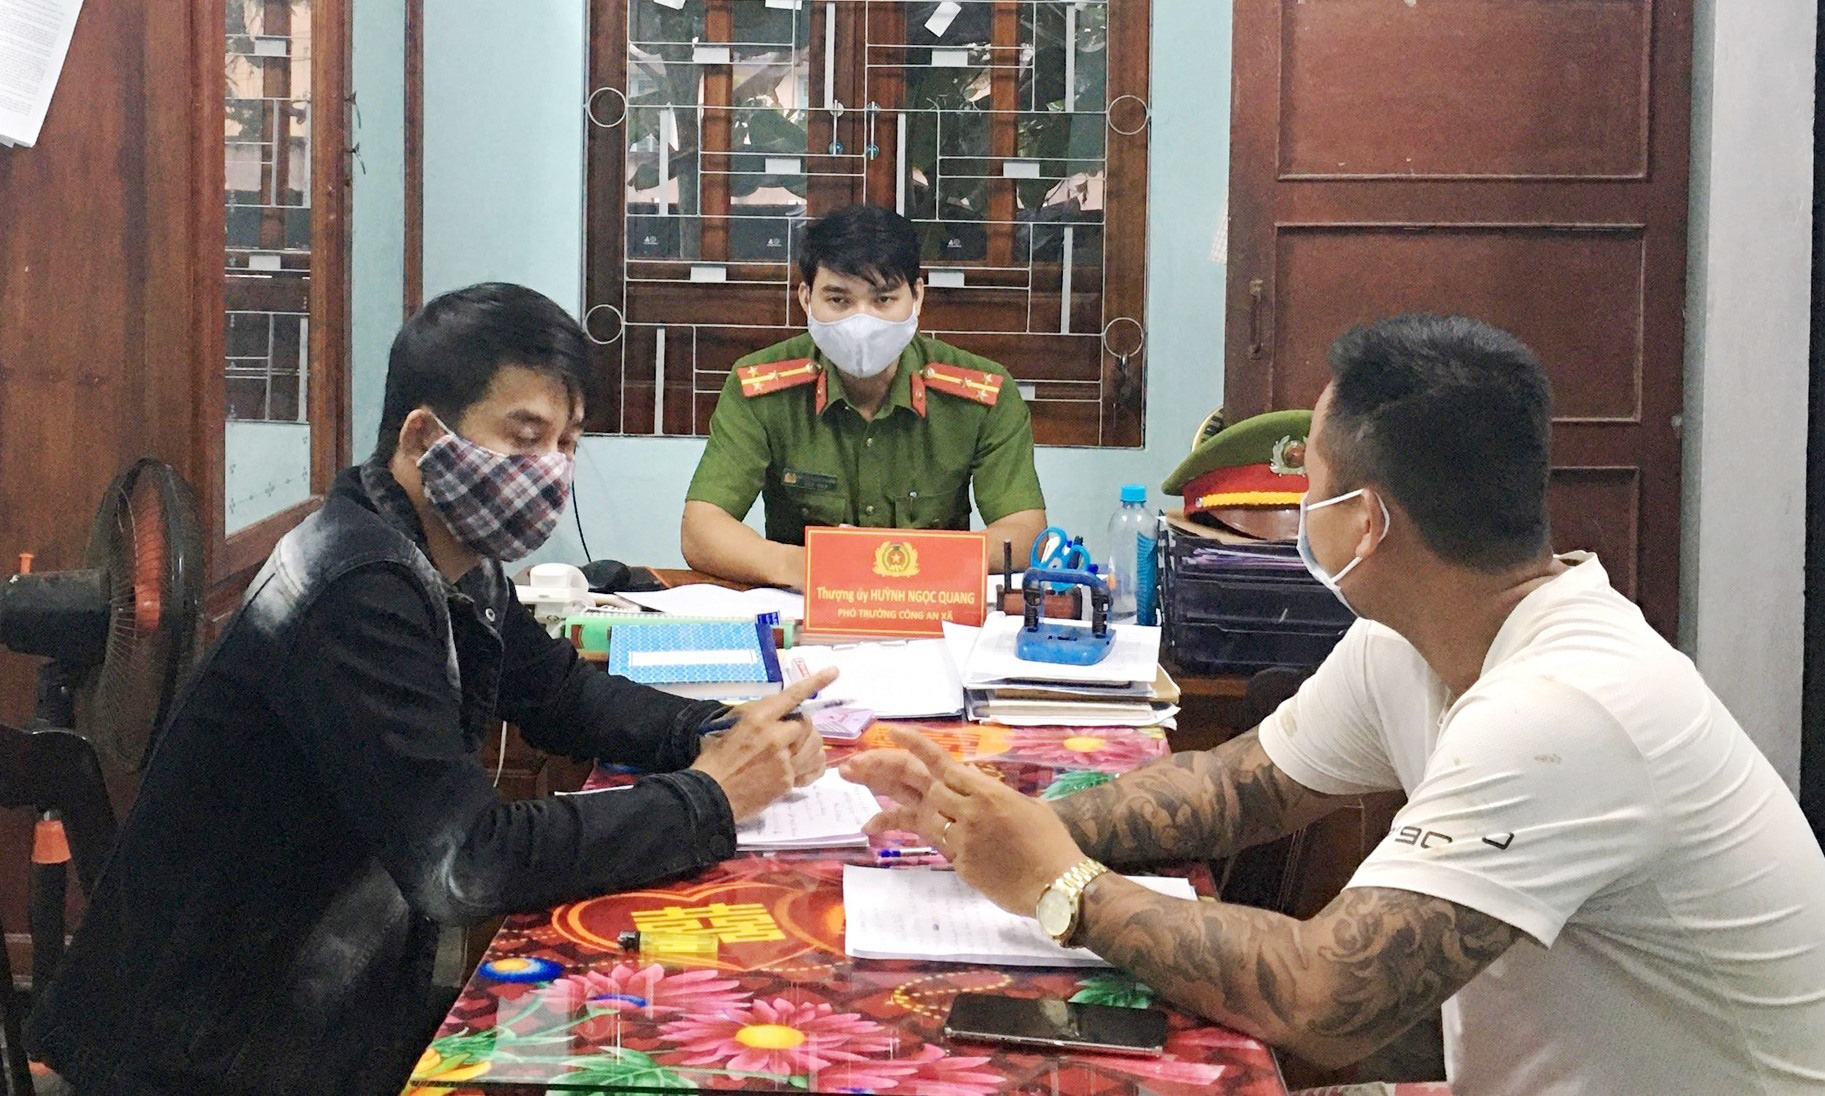 Vietnamese man fined for going fishing during home quarantine